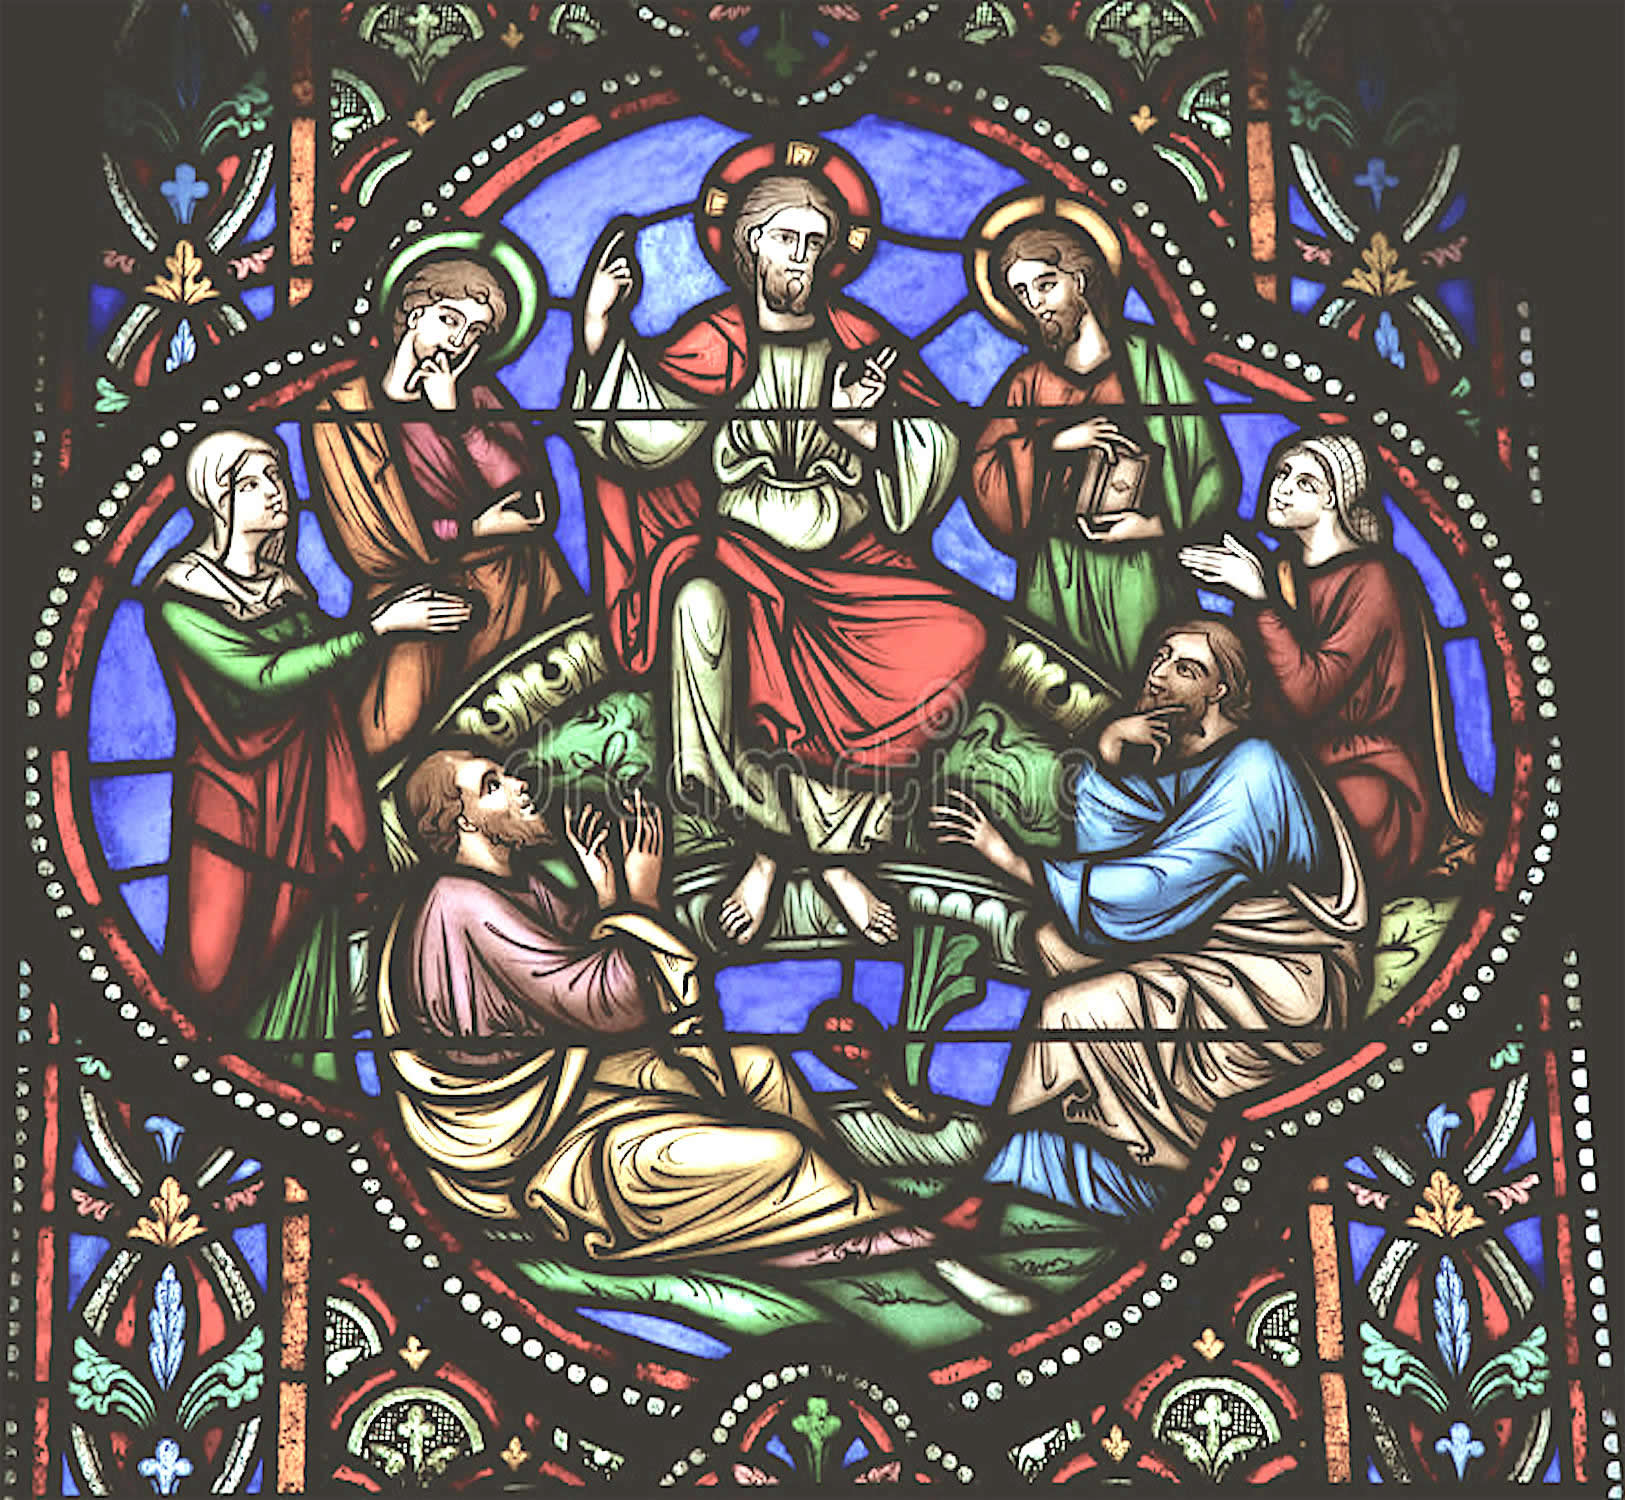 Stained Glass Depiction of Jesus and Followers